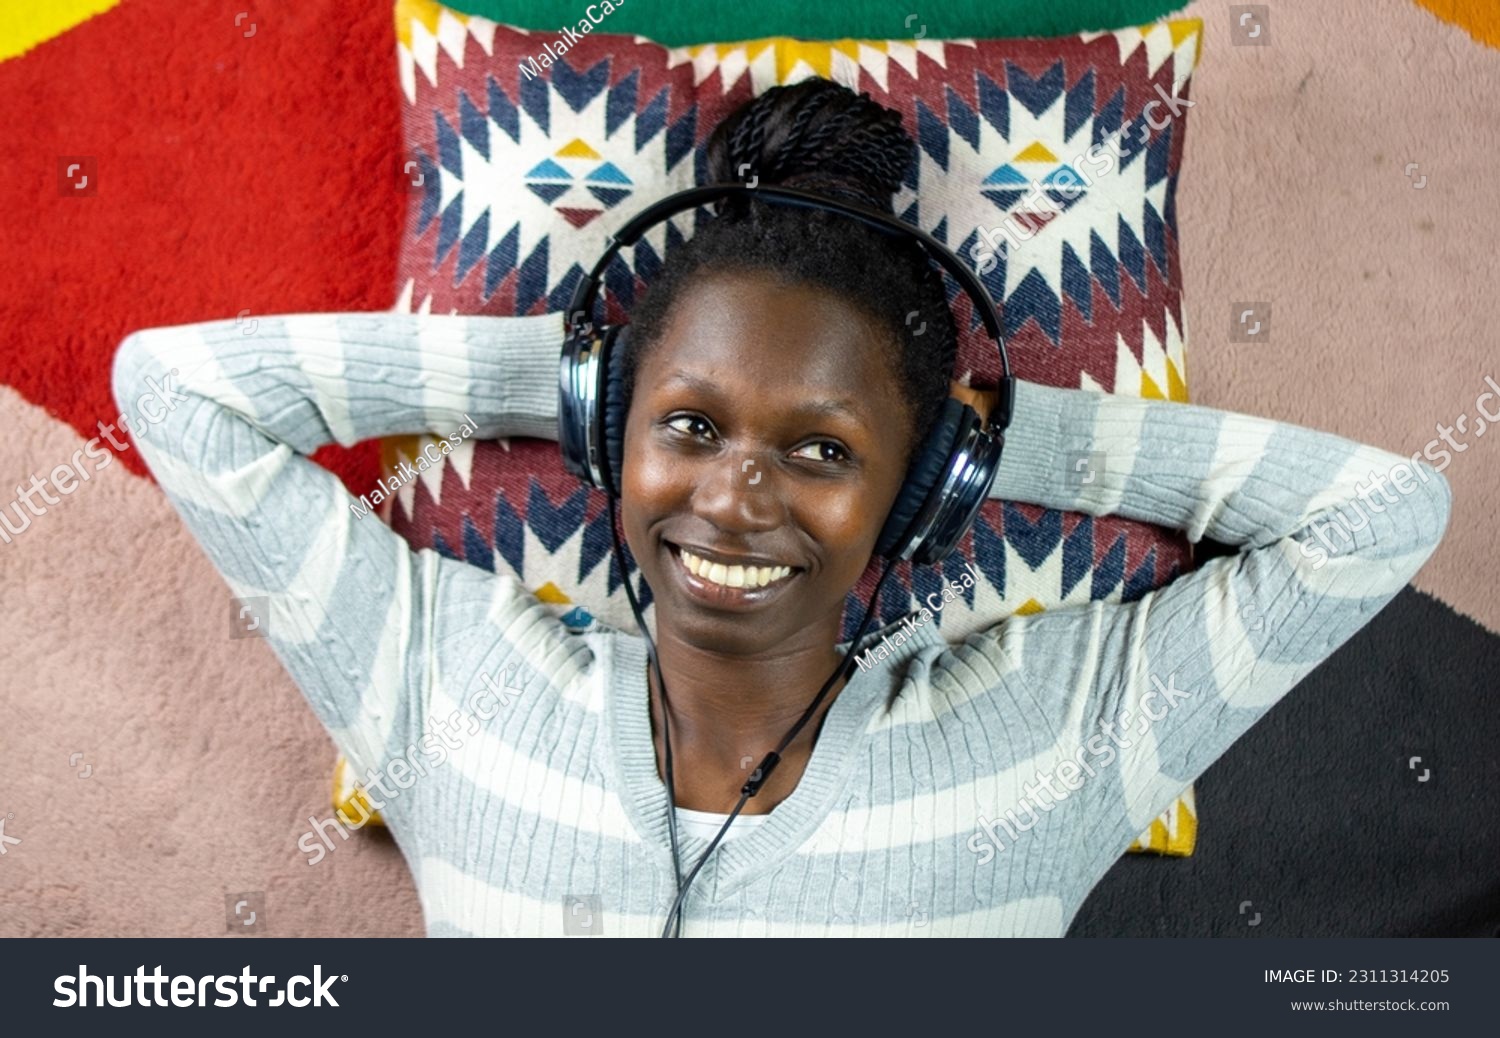 young woman using headphones while lying on a colorful carpet  #2311314205